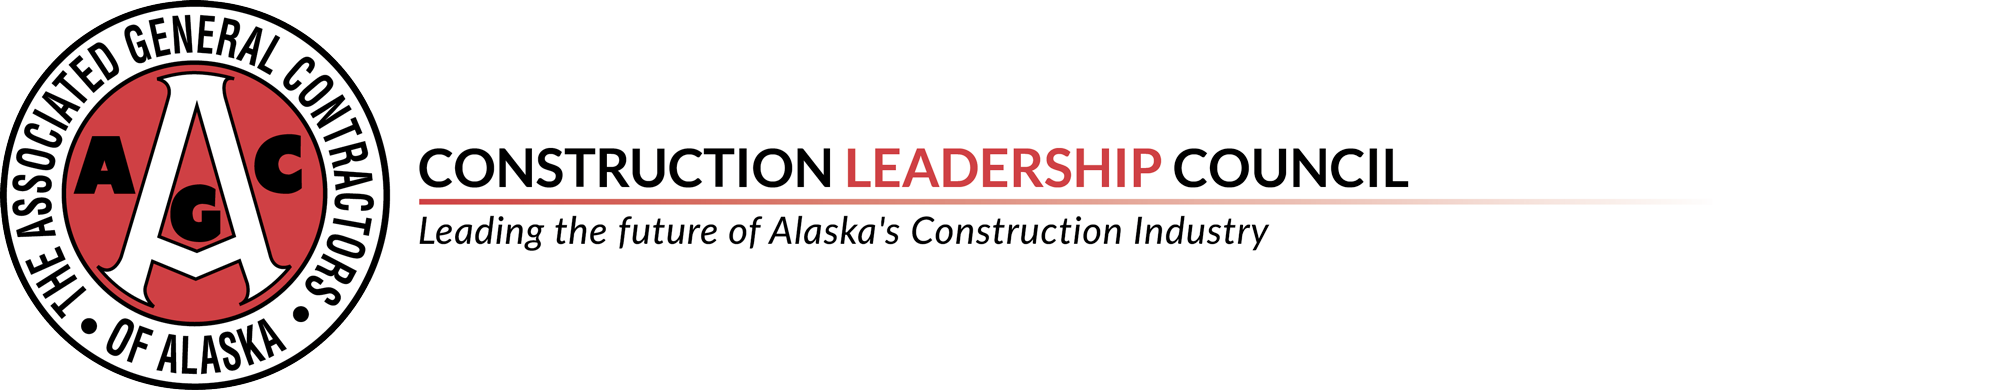 Construction Leadership Council: Leading the future of Alaska's Construction Industry